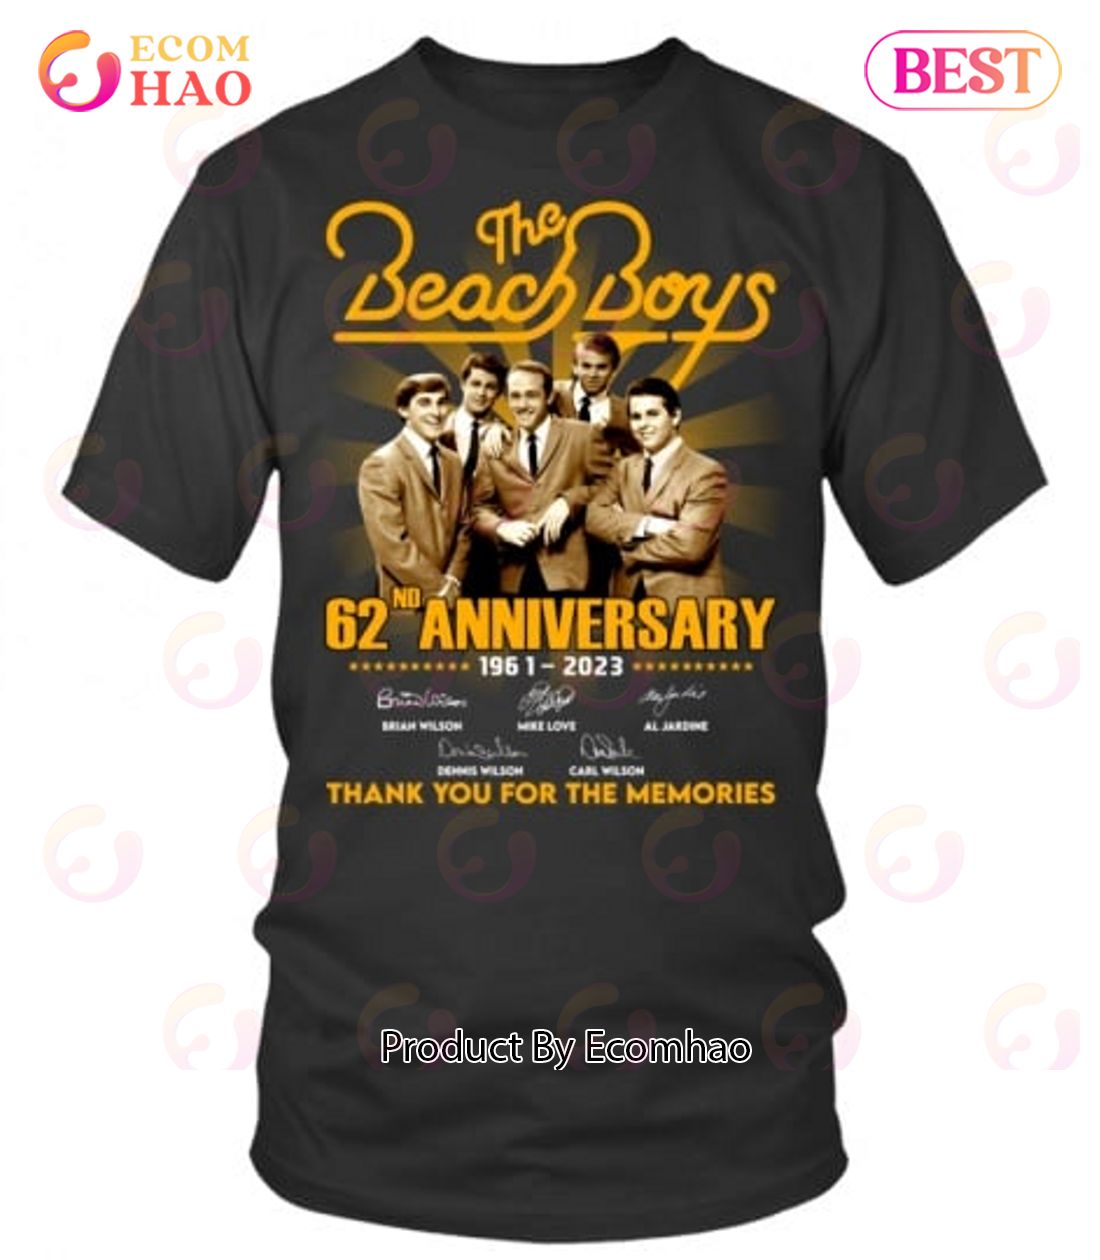 The Beach Boys 62nd Anniversary 1961 – 2023 Thank You For The Memories T-Shirt